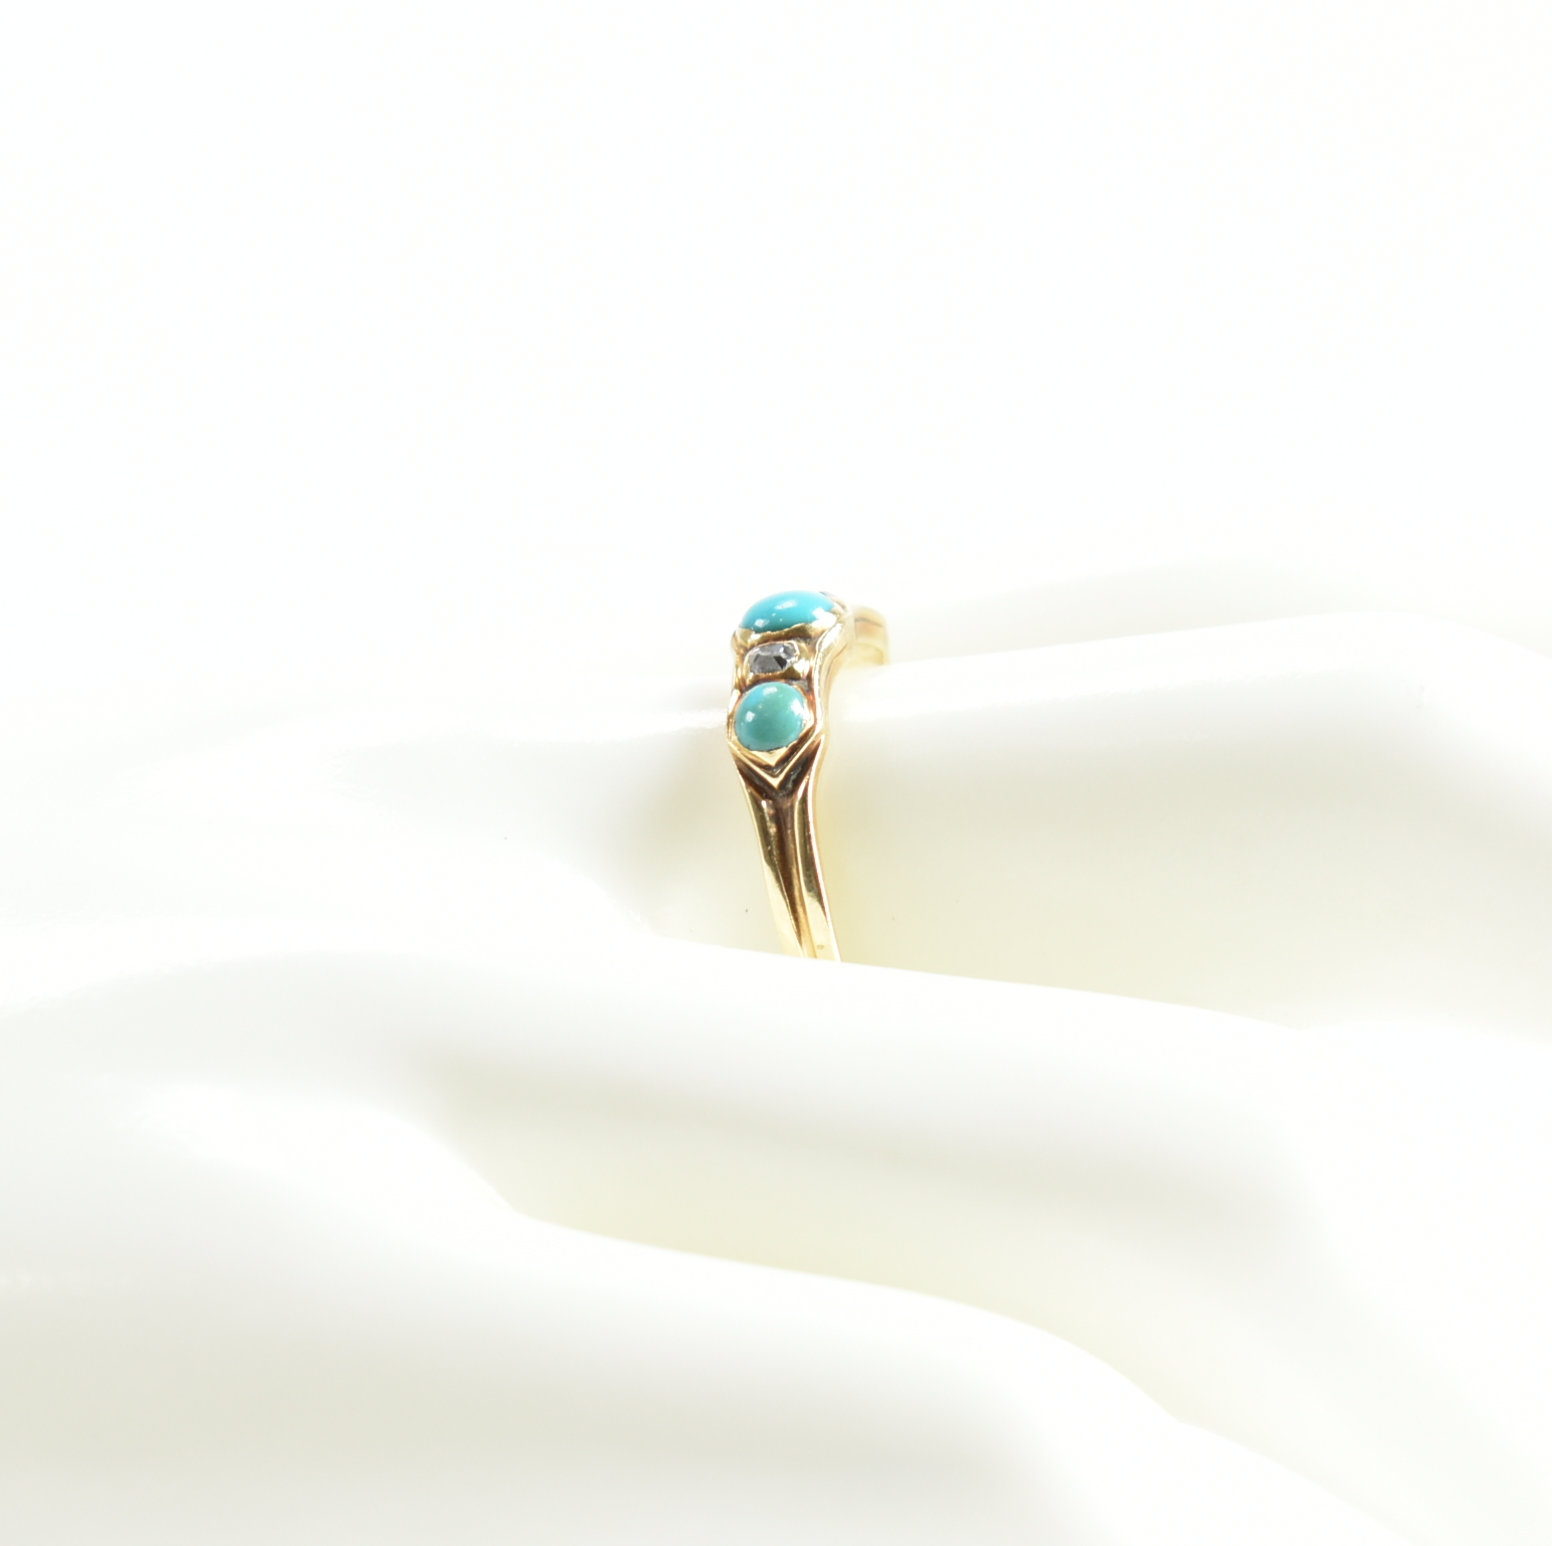 VICTORIAN GOLD TURQUOISE & DIAMOND RING - Image 8 of 8